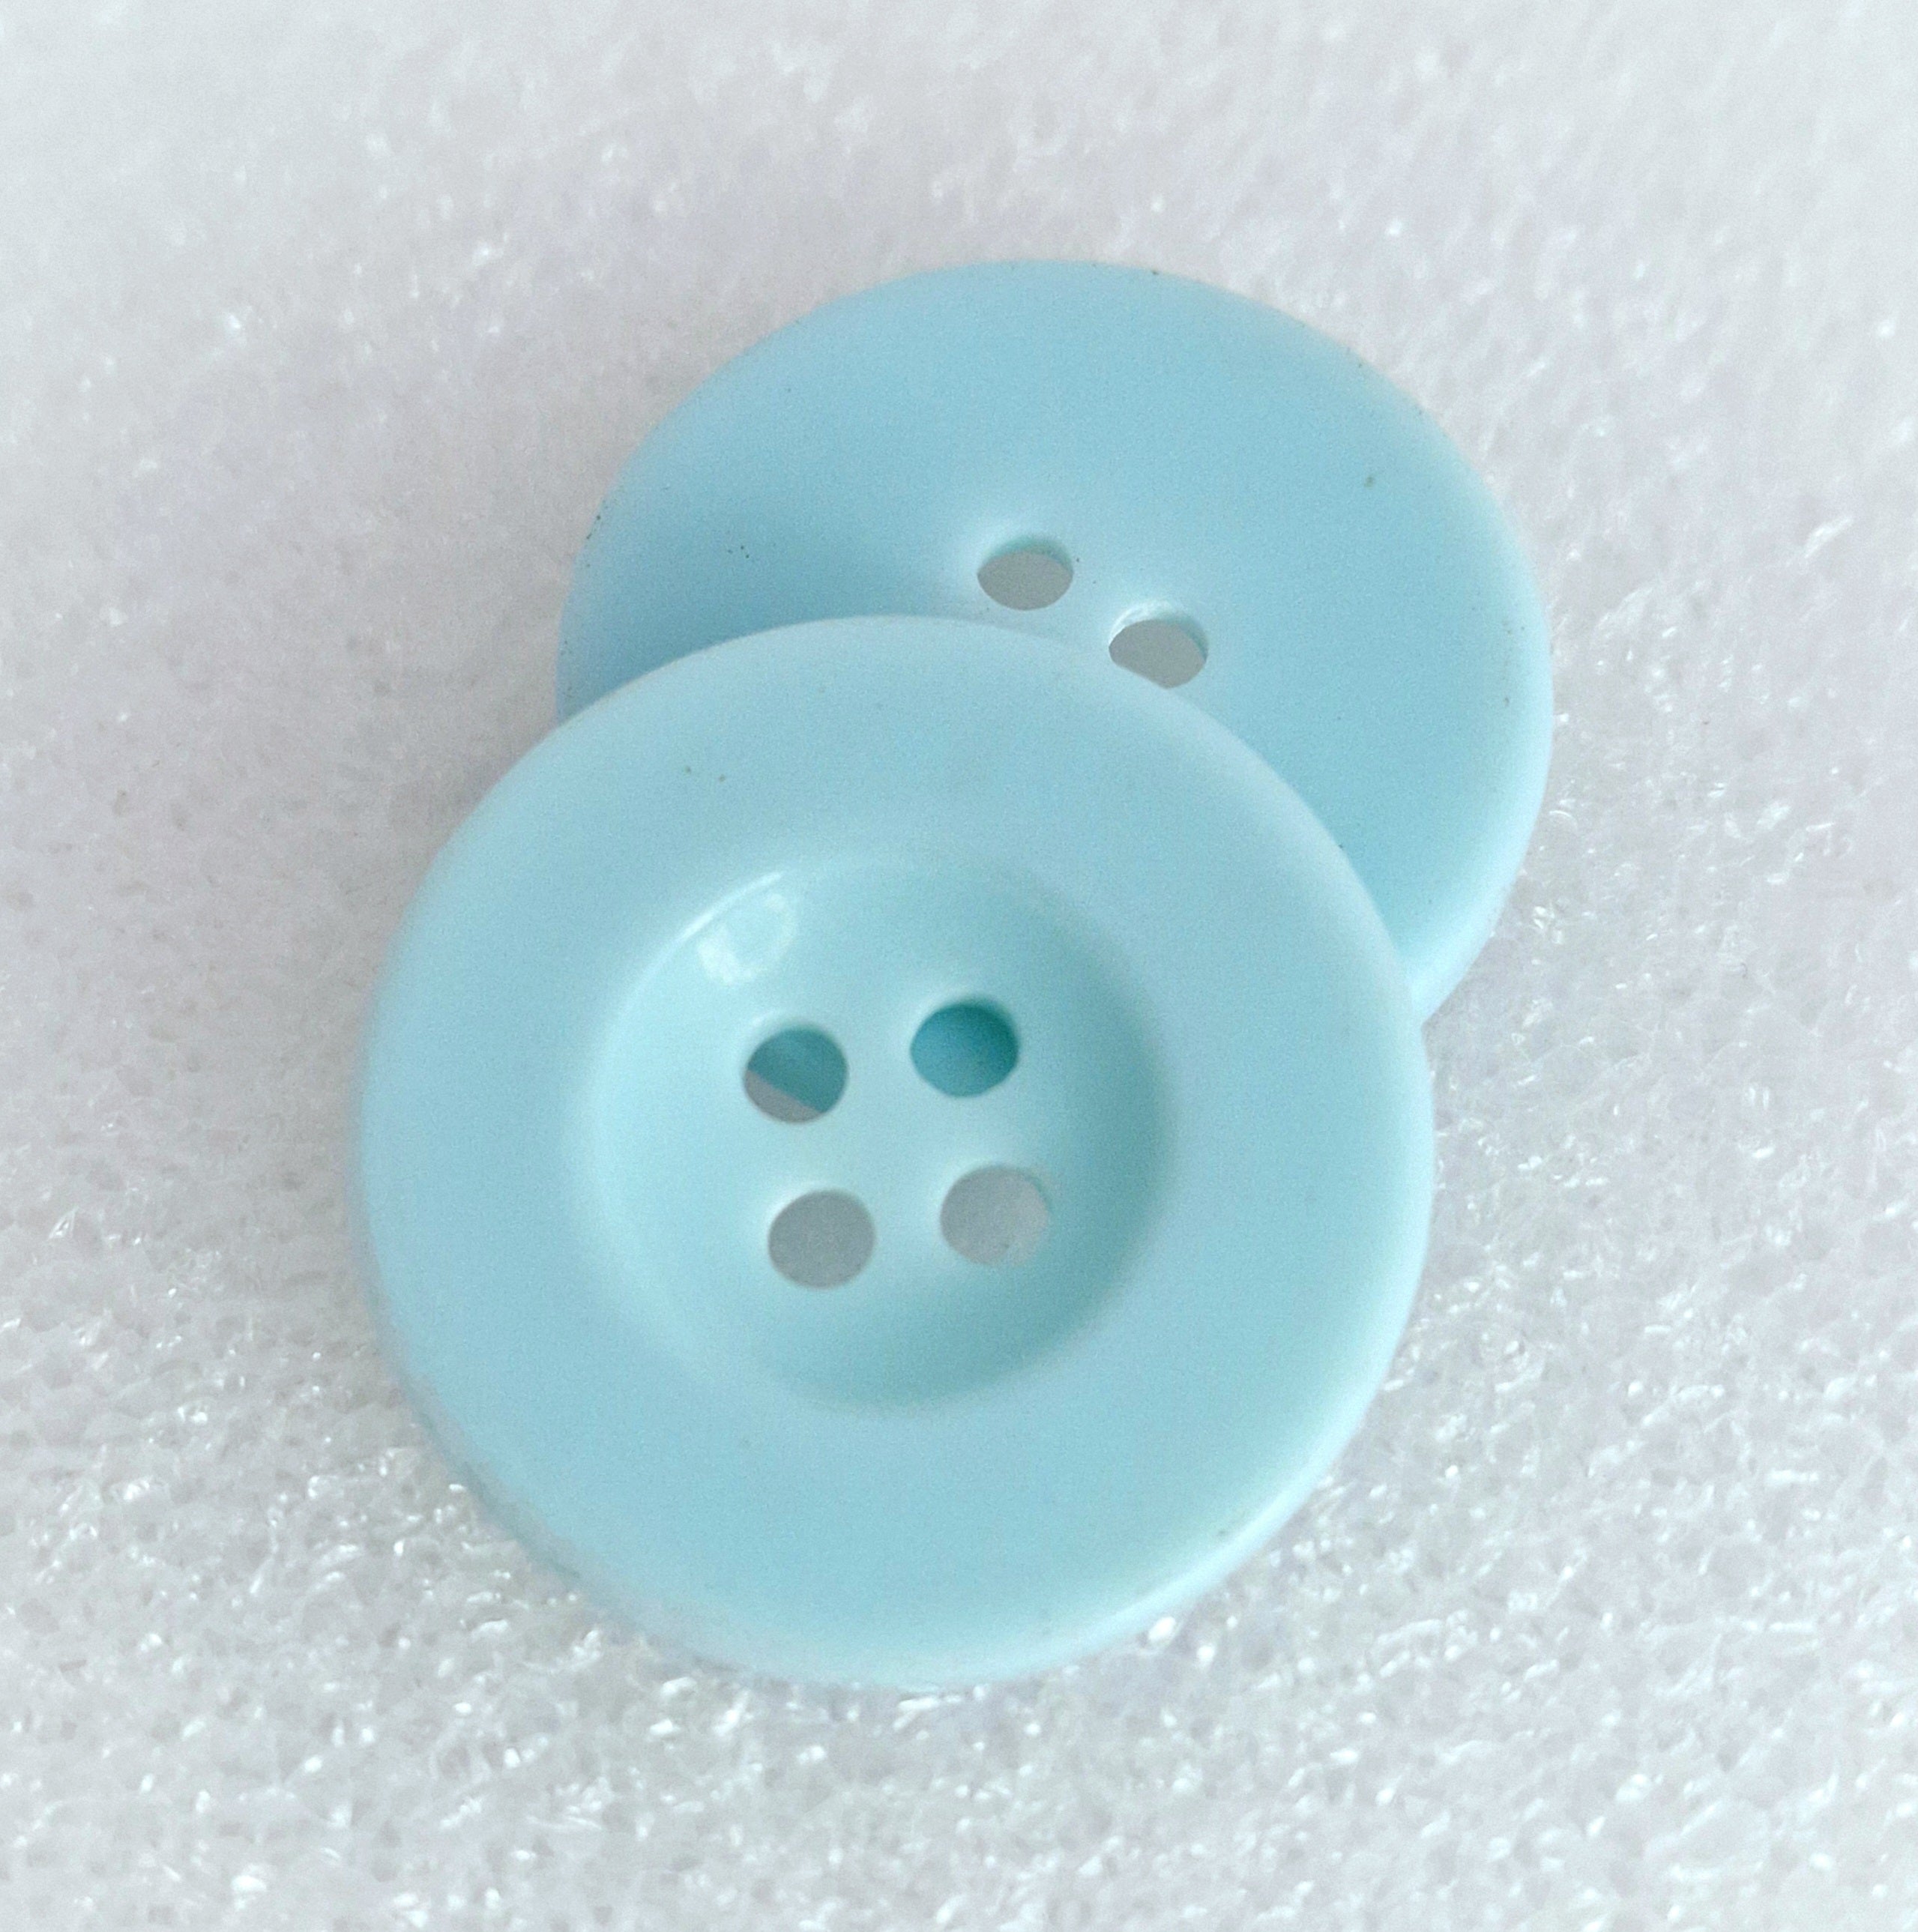 MajorCrafts 16pcs 25mm Sky Blue 4 Holes Round Resin Sewing Buttons